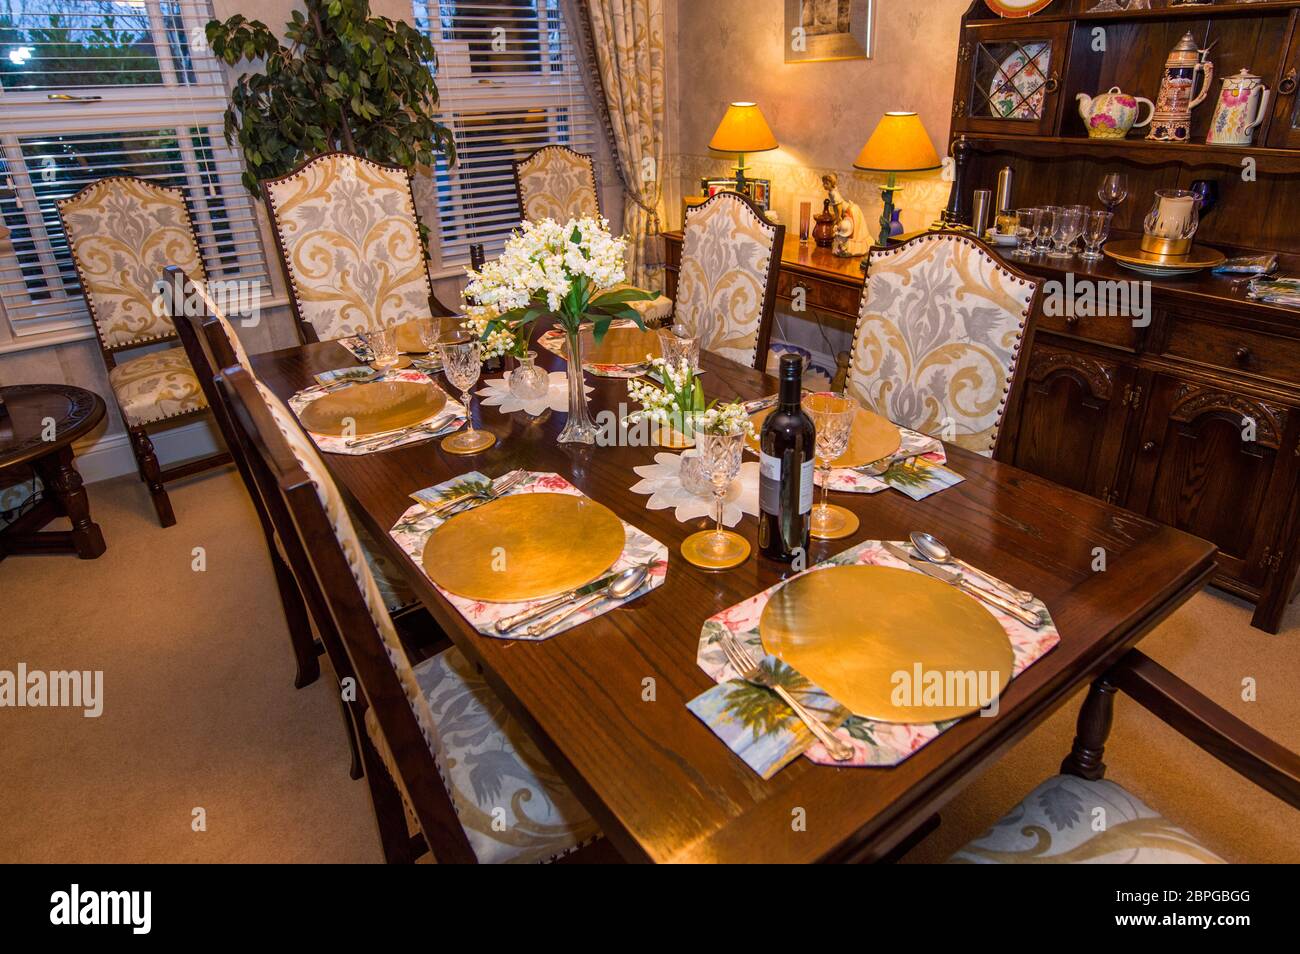 Luxury Dining Table Set For Meal In Dining Room England Uk Stock Photo Alamy